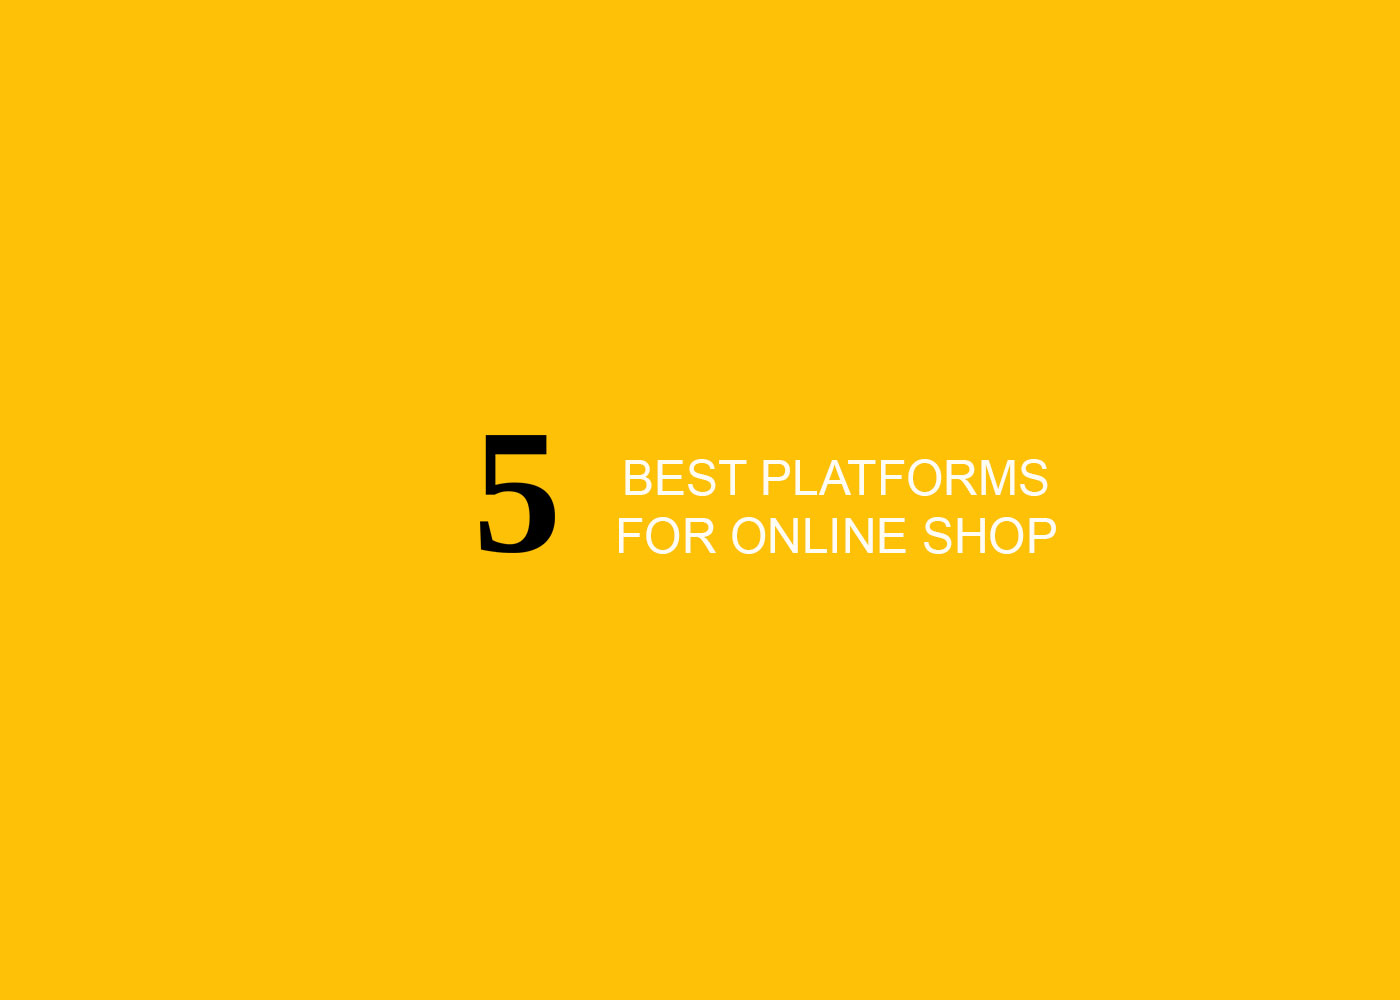 How to create an online shop? Top 5 paid platforms for ecommerce